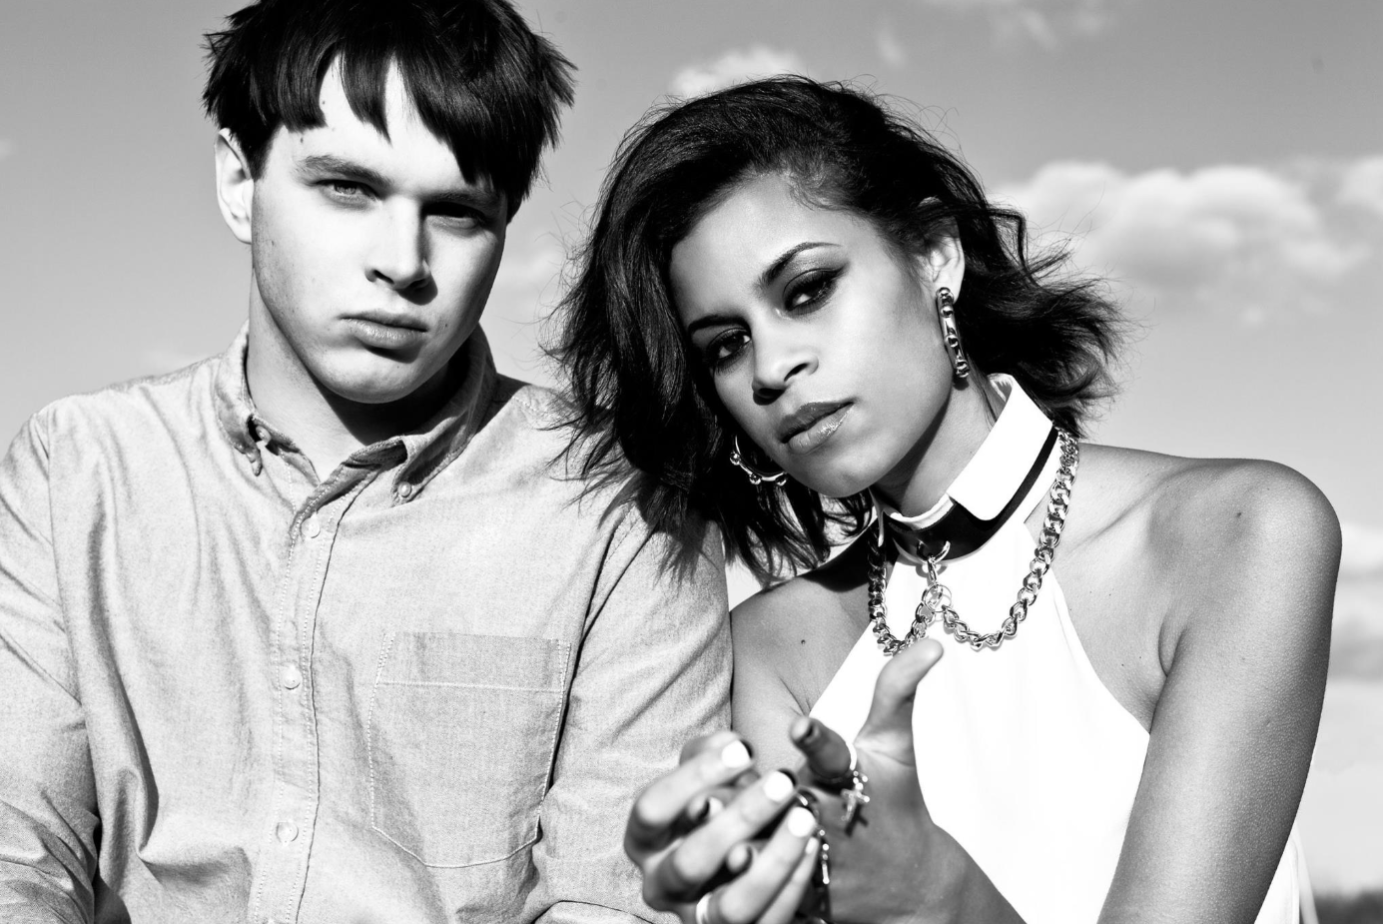 Photography for AlunaGeorge by FionaGarden